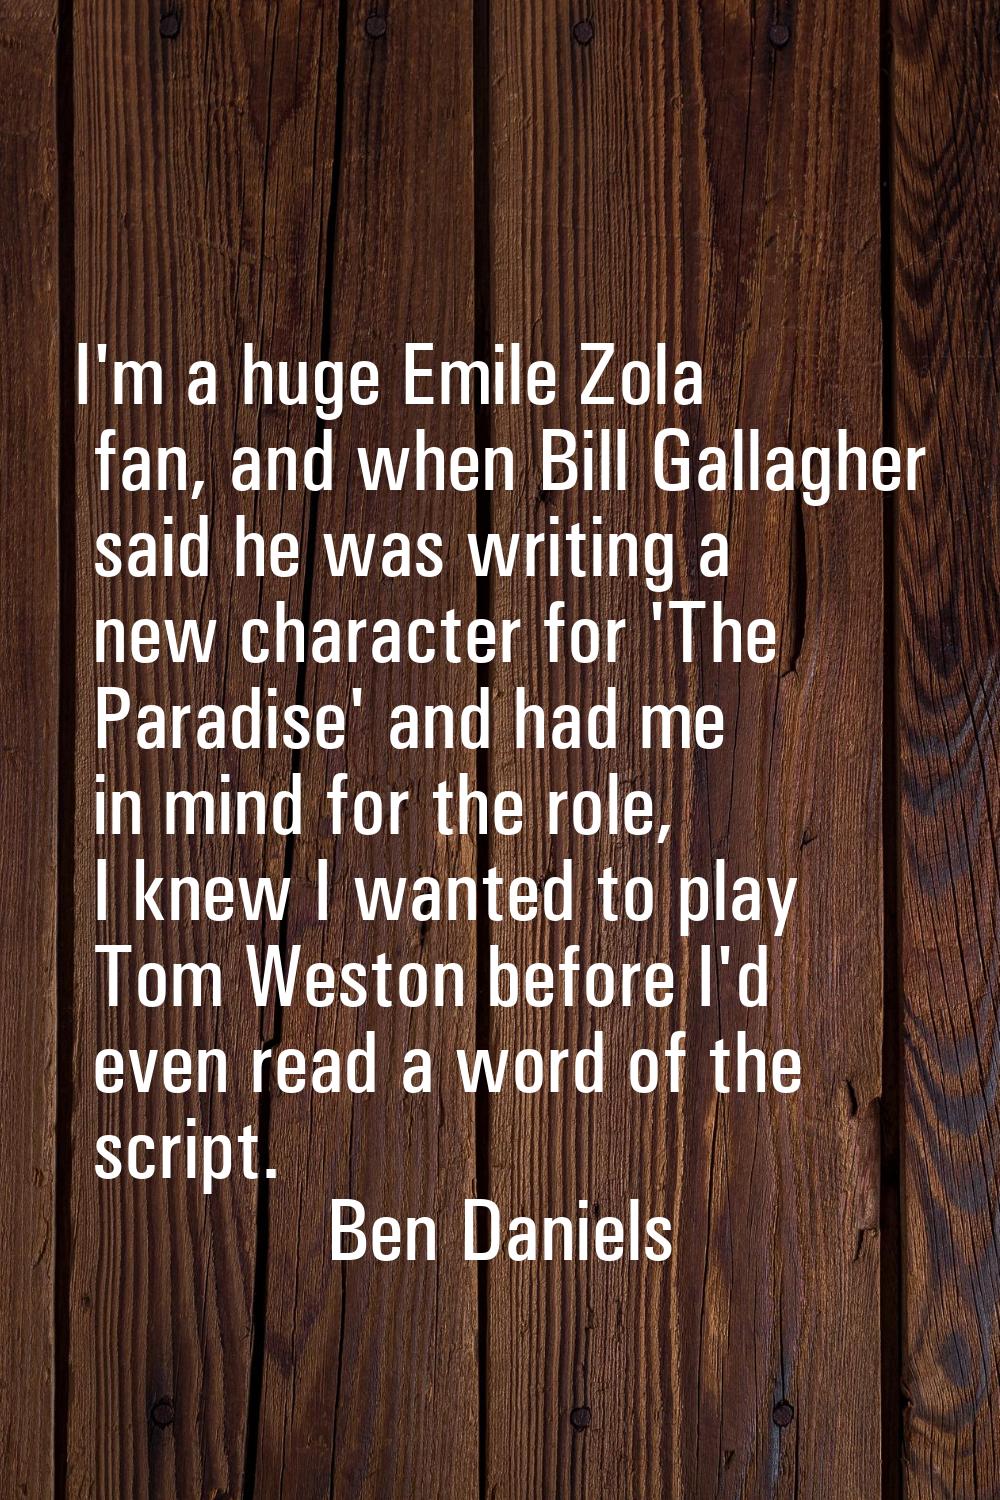 I'm a huge Emile Zola fan, and when Bill Gallagher said he was writing a new character for 'The Par